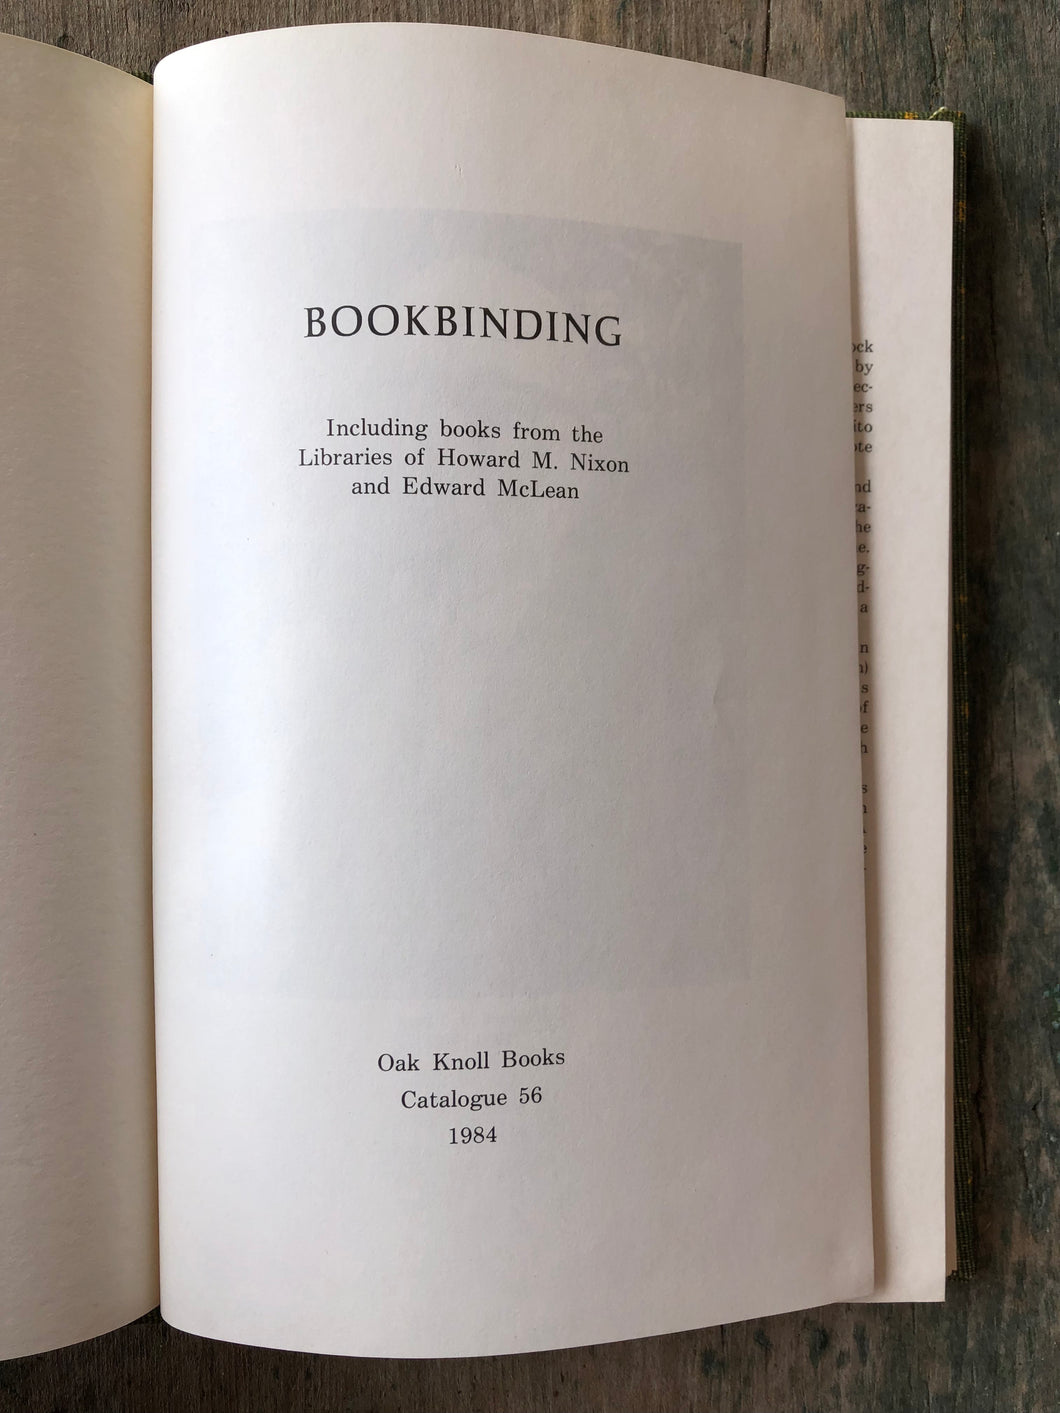 Bookbinding: Including books from the Libraries of Howard M. Nixon and Edward McLean